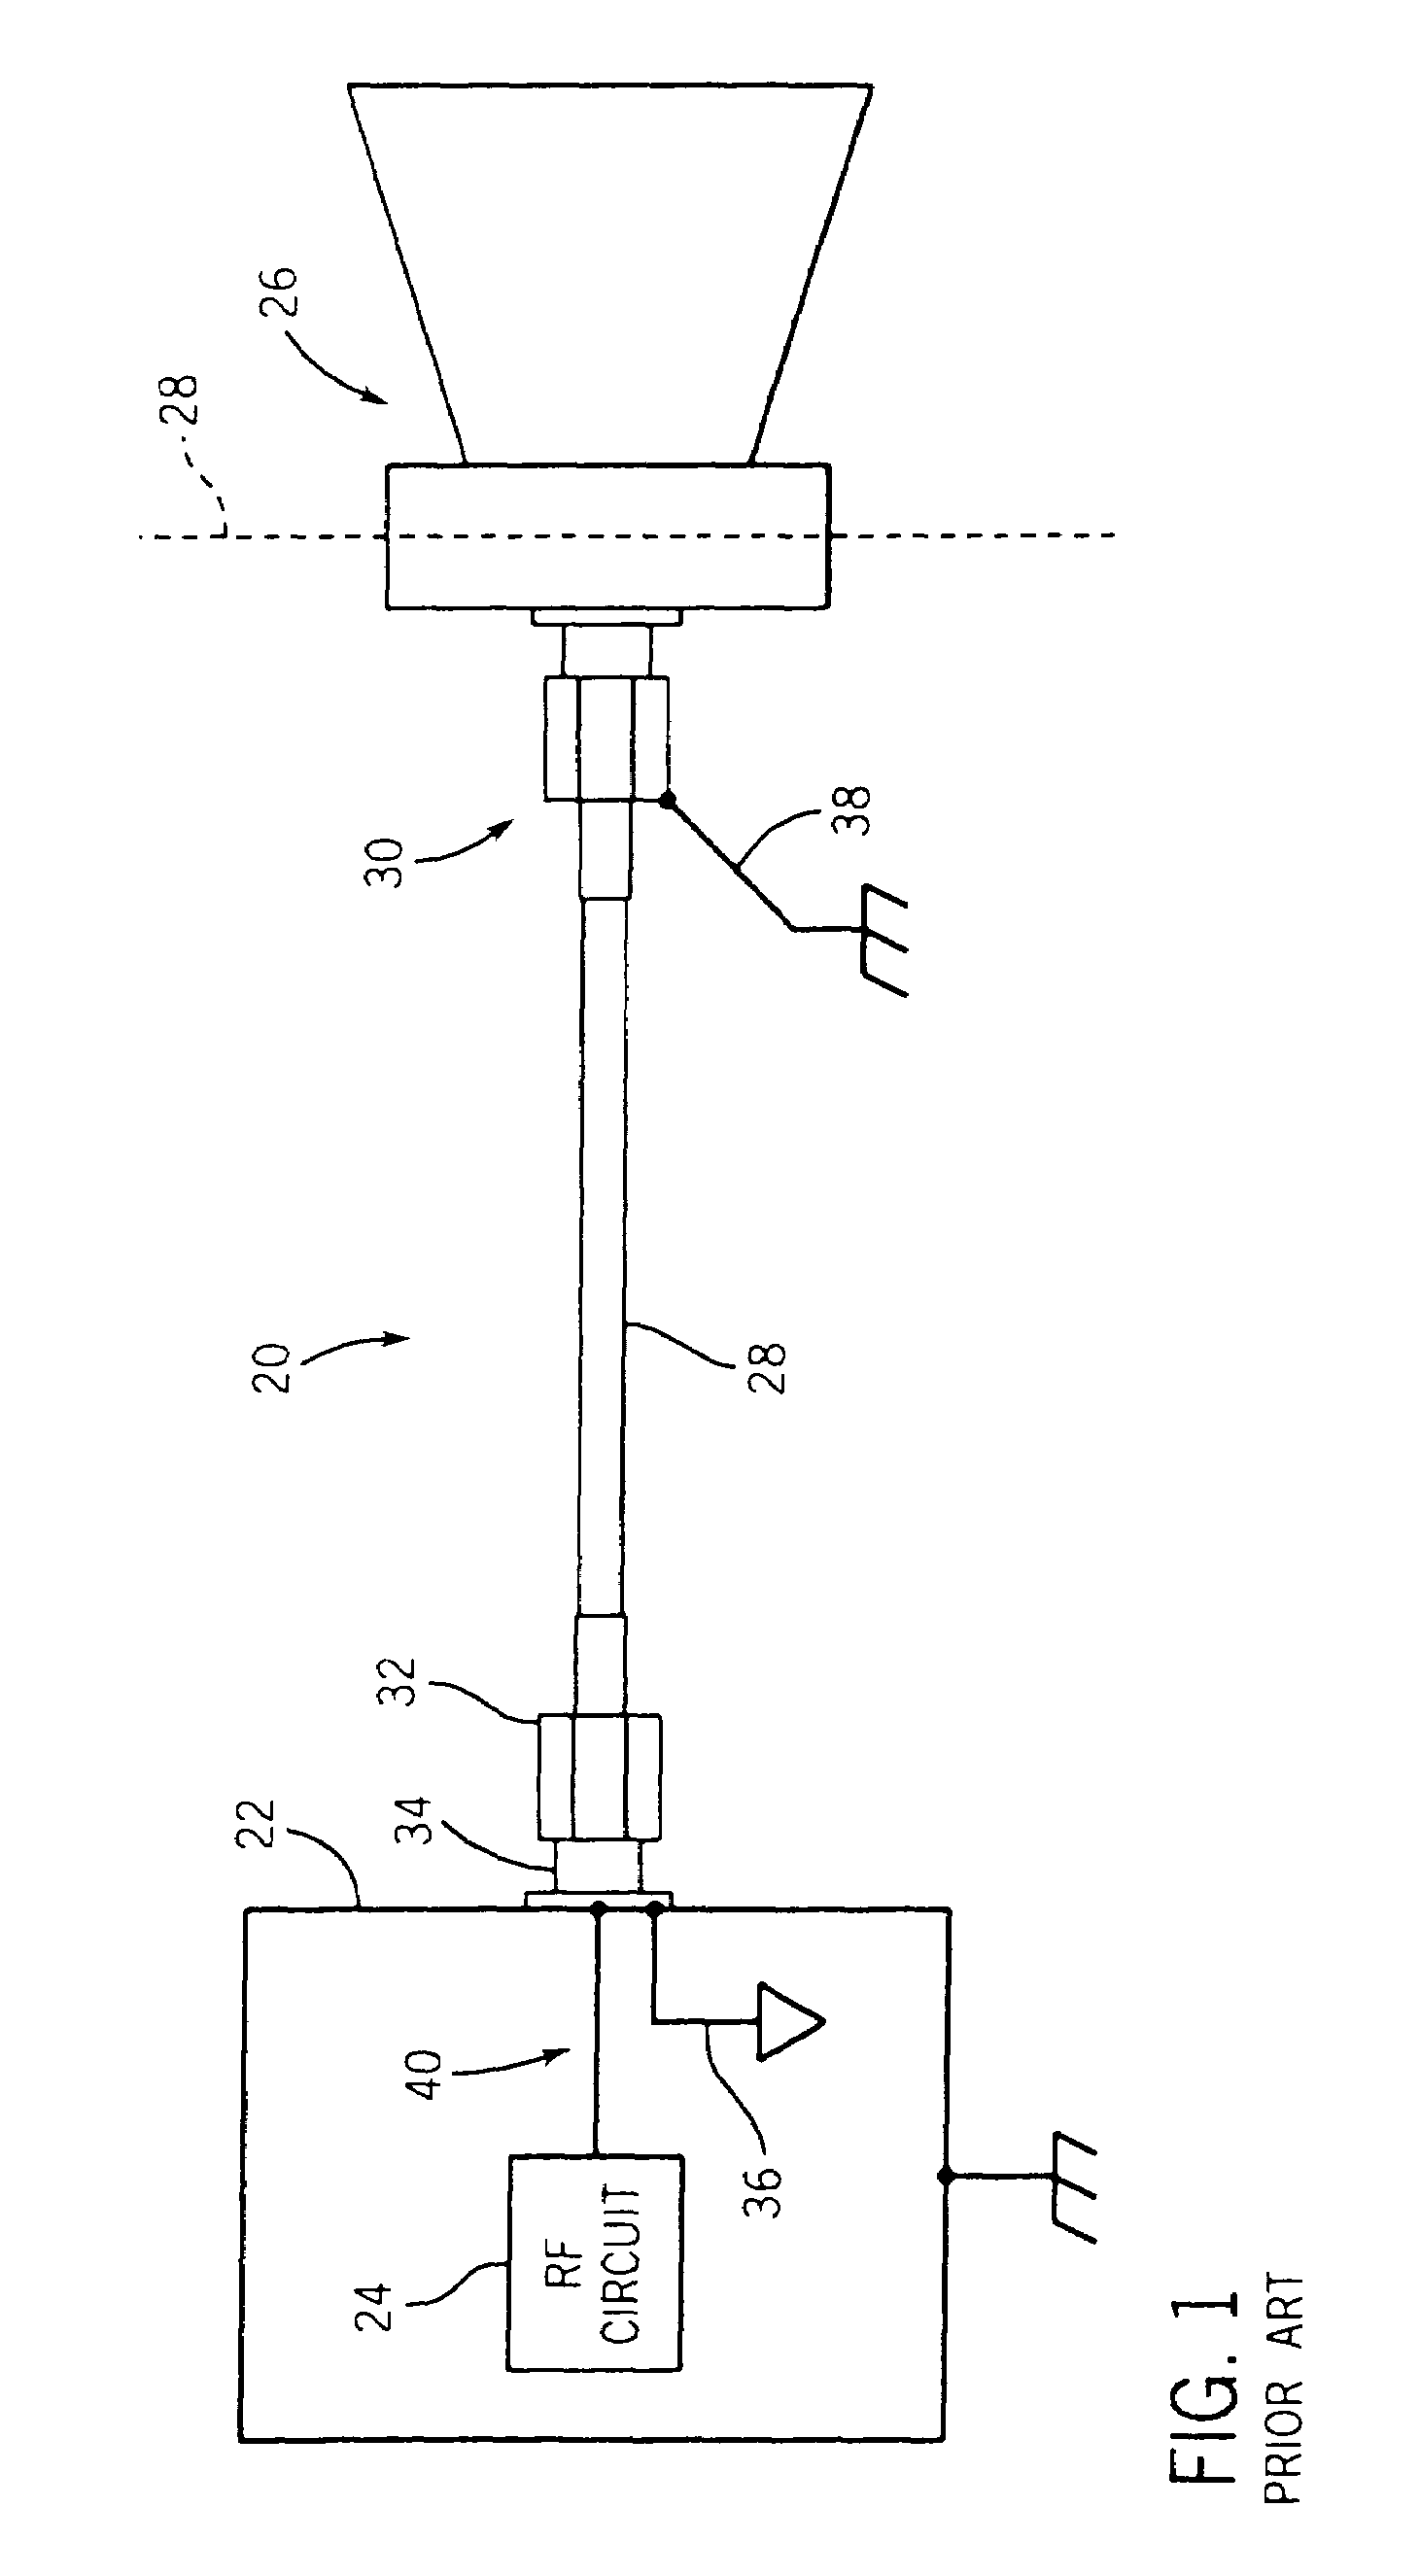 Process control instrument intrinsic safety barrier